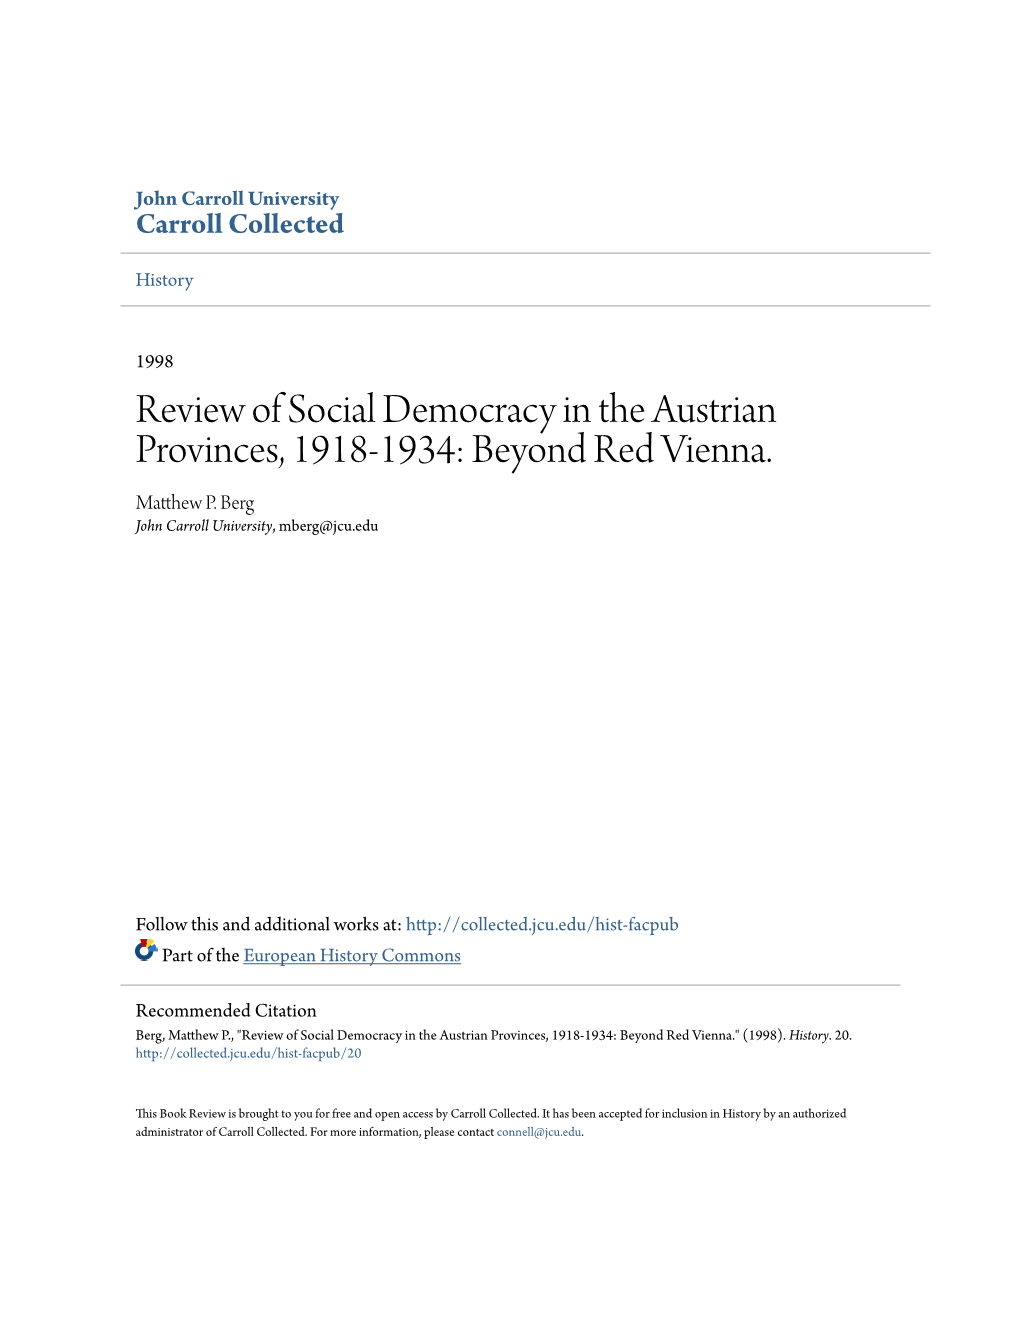 Review of Social Democracy in the Austrian Provinces, 1918-1934: Beyond Red Vienna